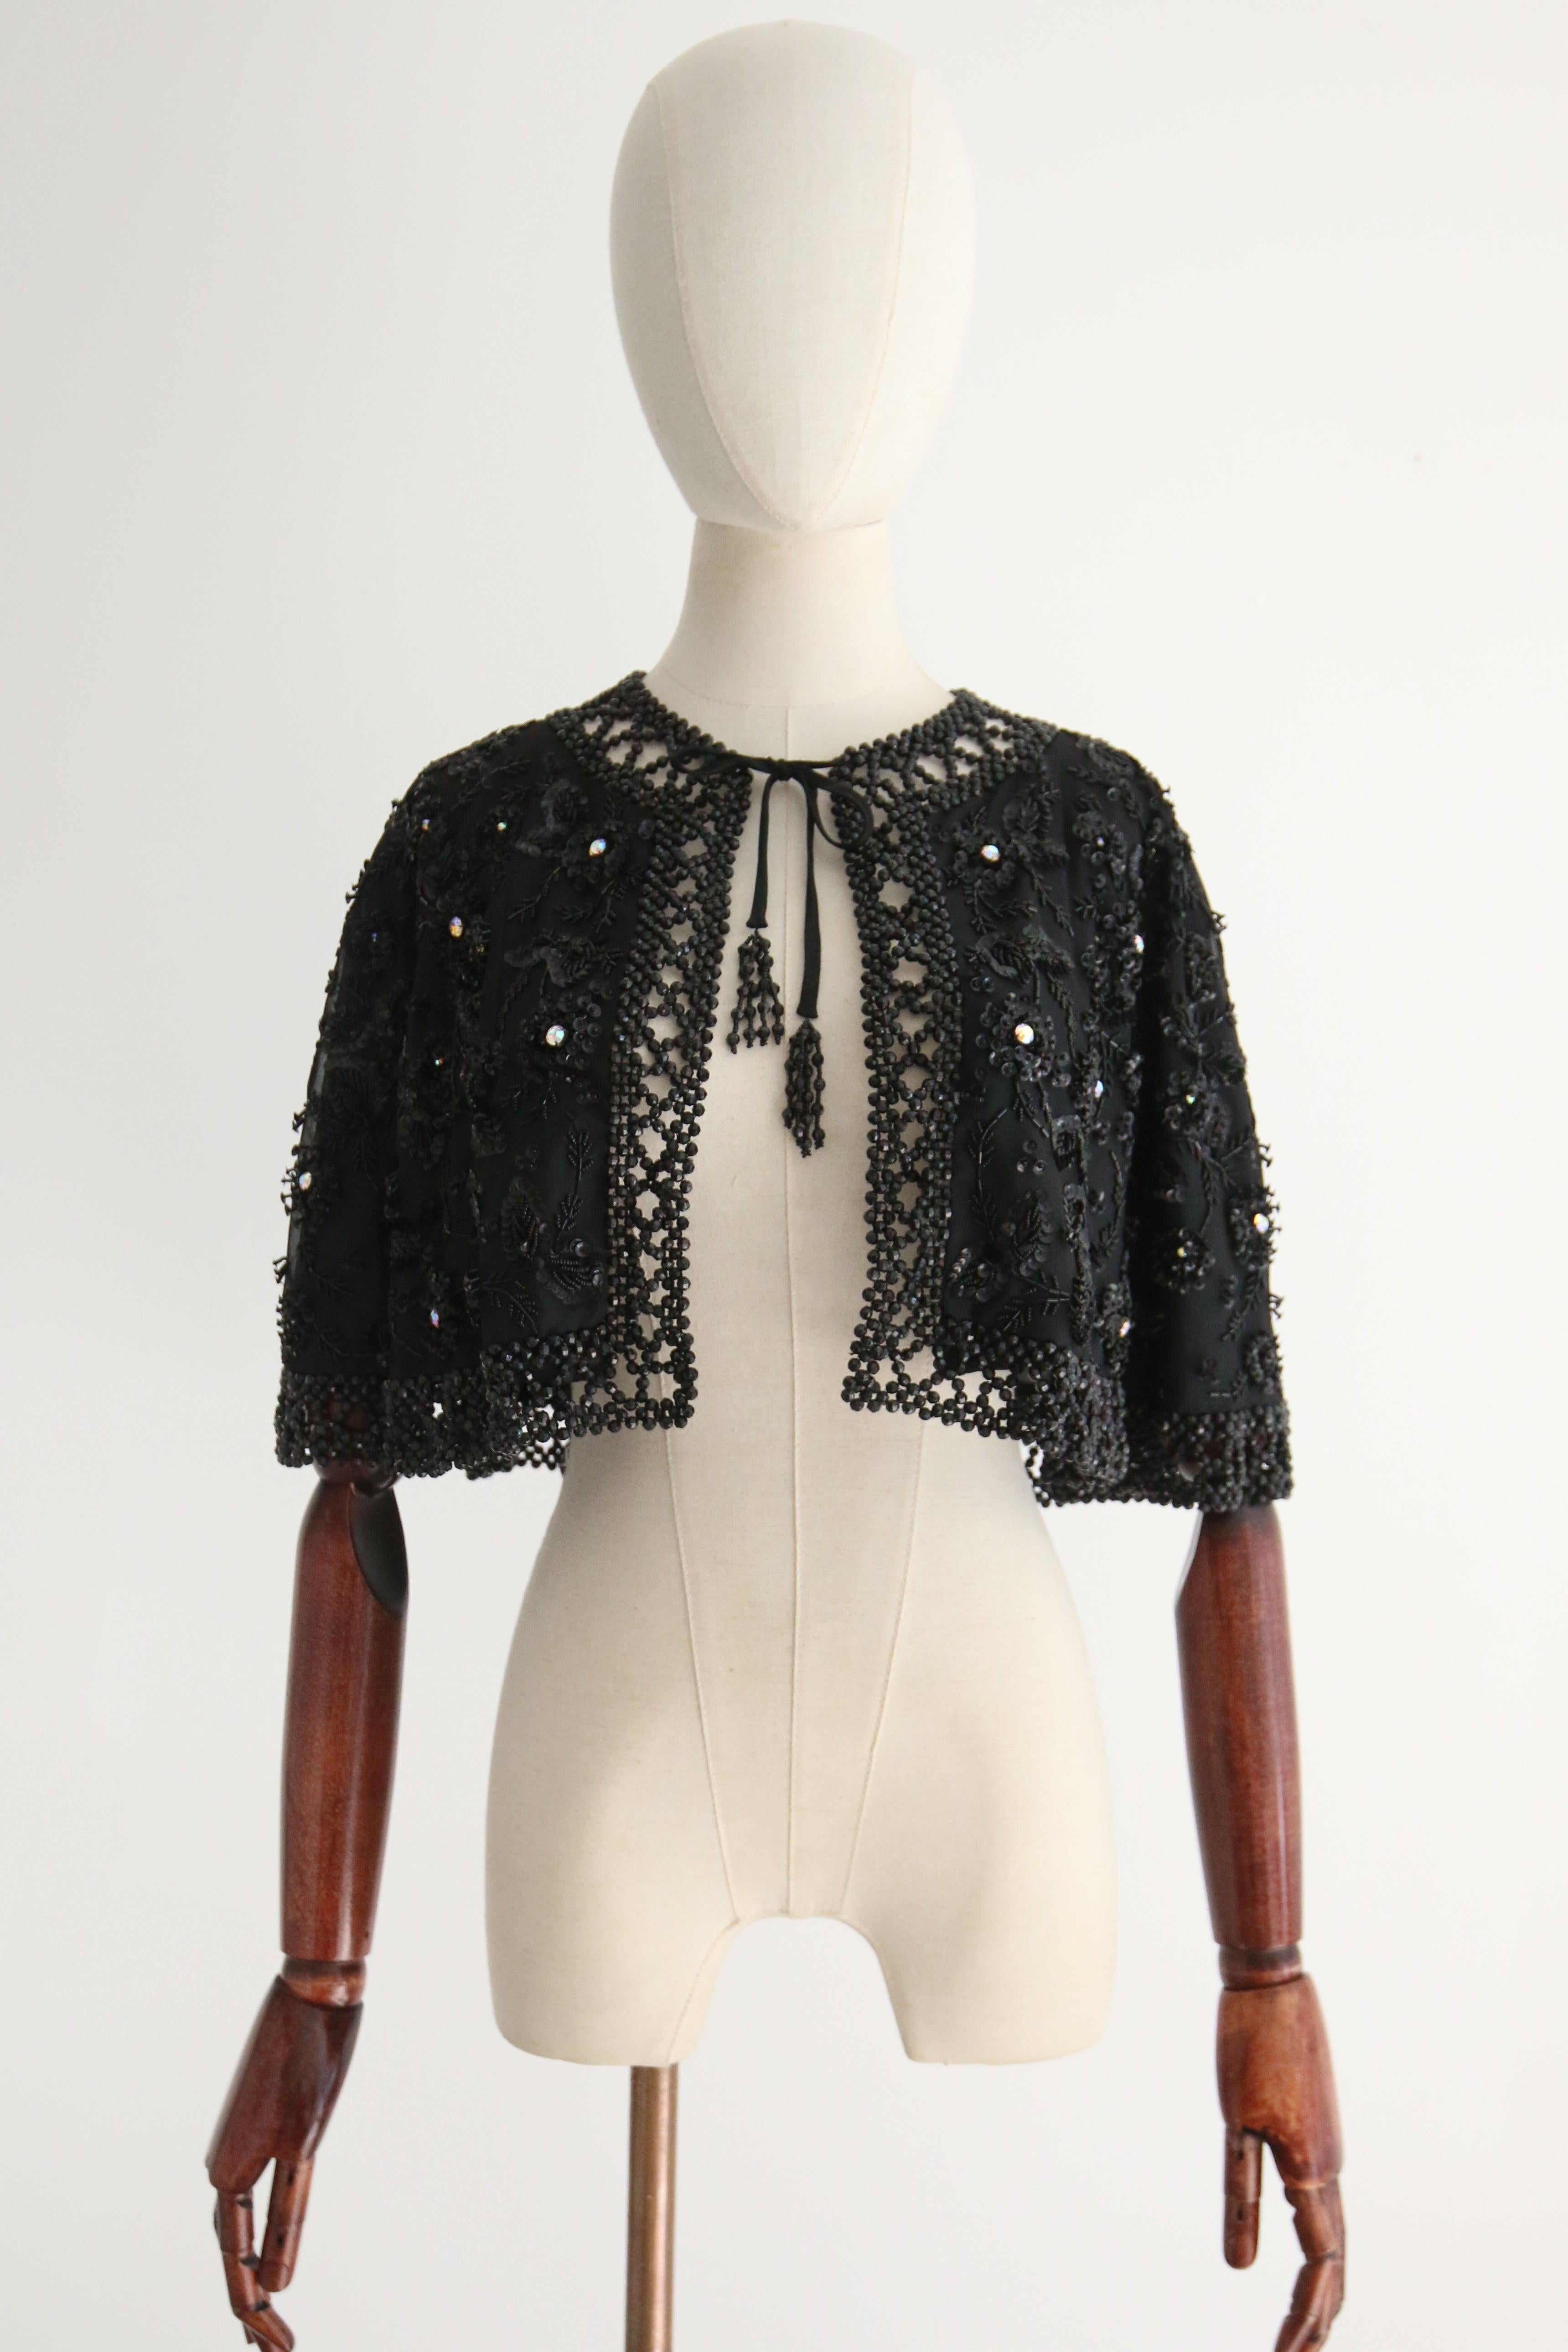 This divine 1960's black shoulder cape, decorated with black sequins and beads, and accented by large claw set iridescent rhinestones, in a trailing floral pattern, is just the perfect finishing touch to your evening attire. The rounded neckline of